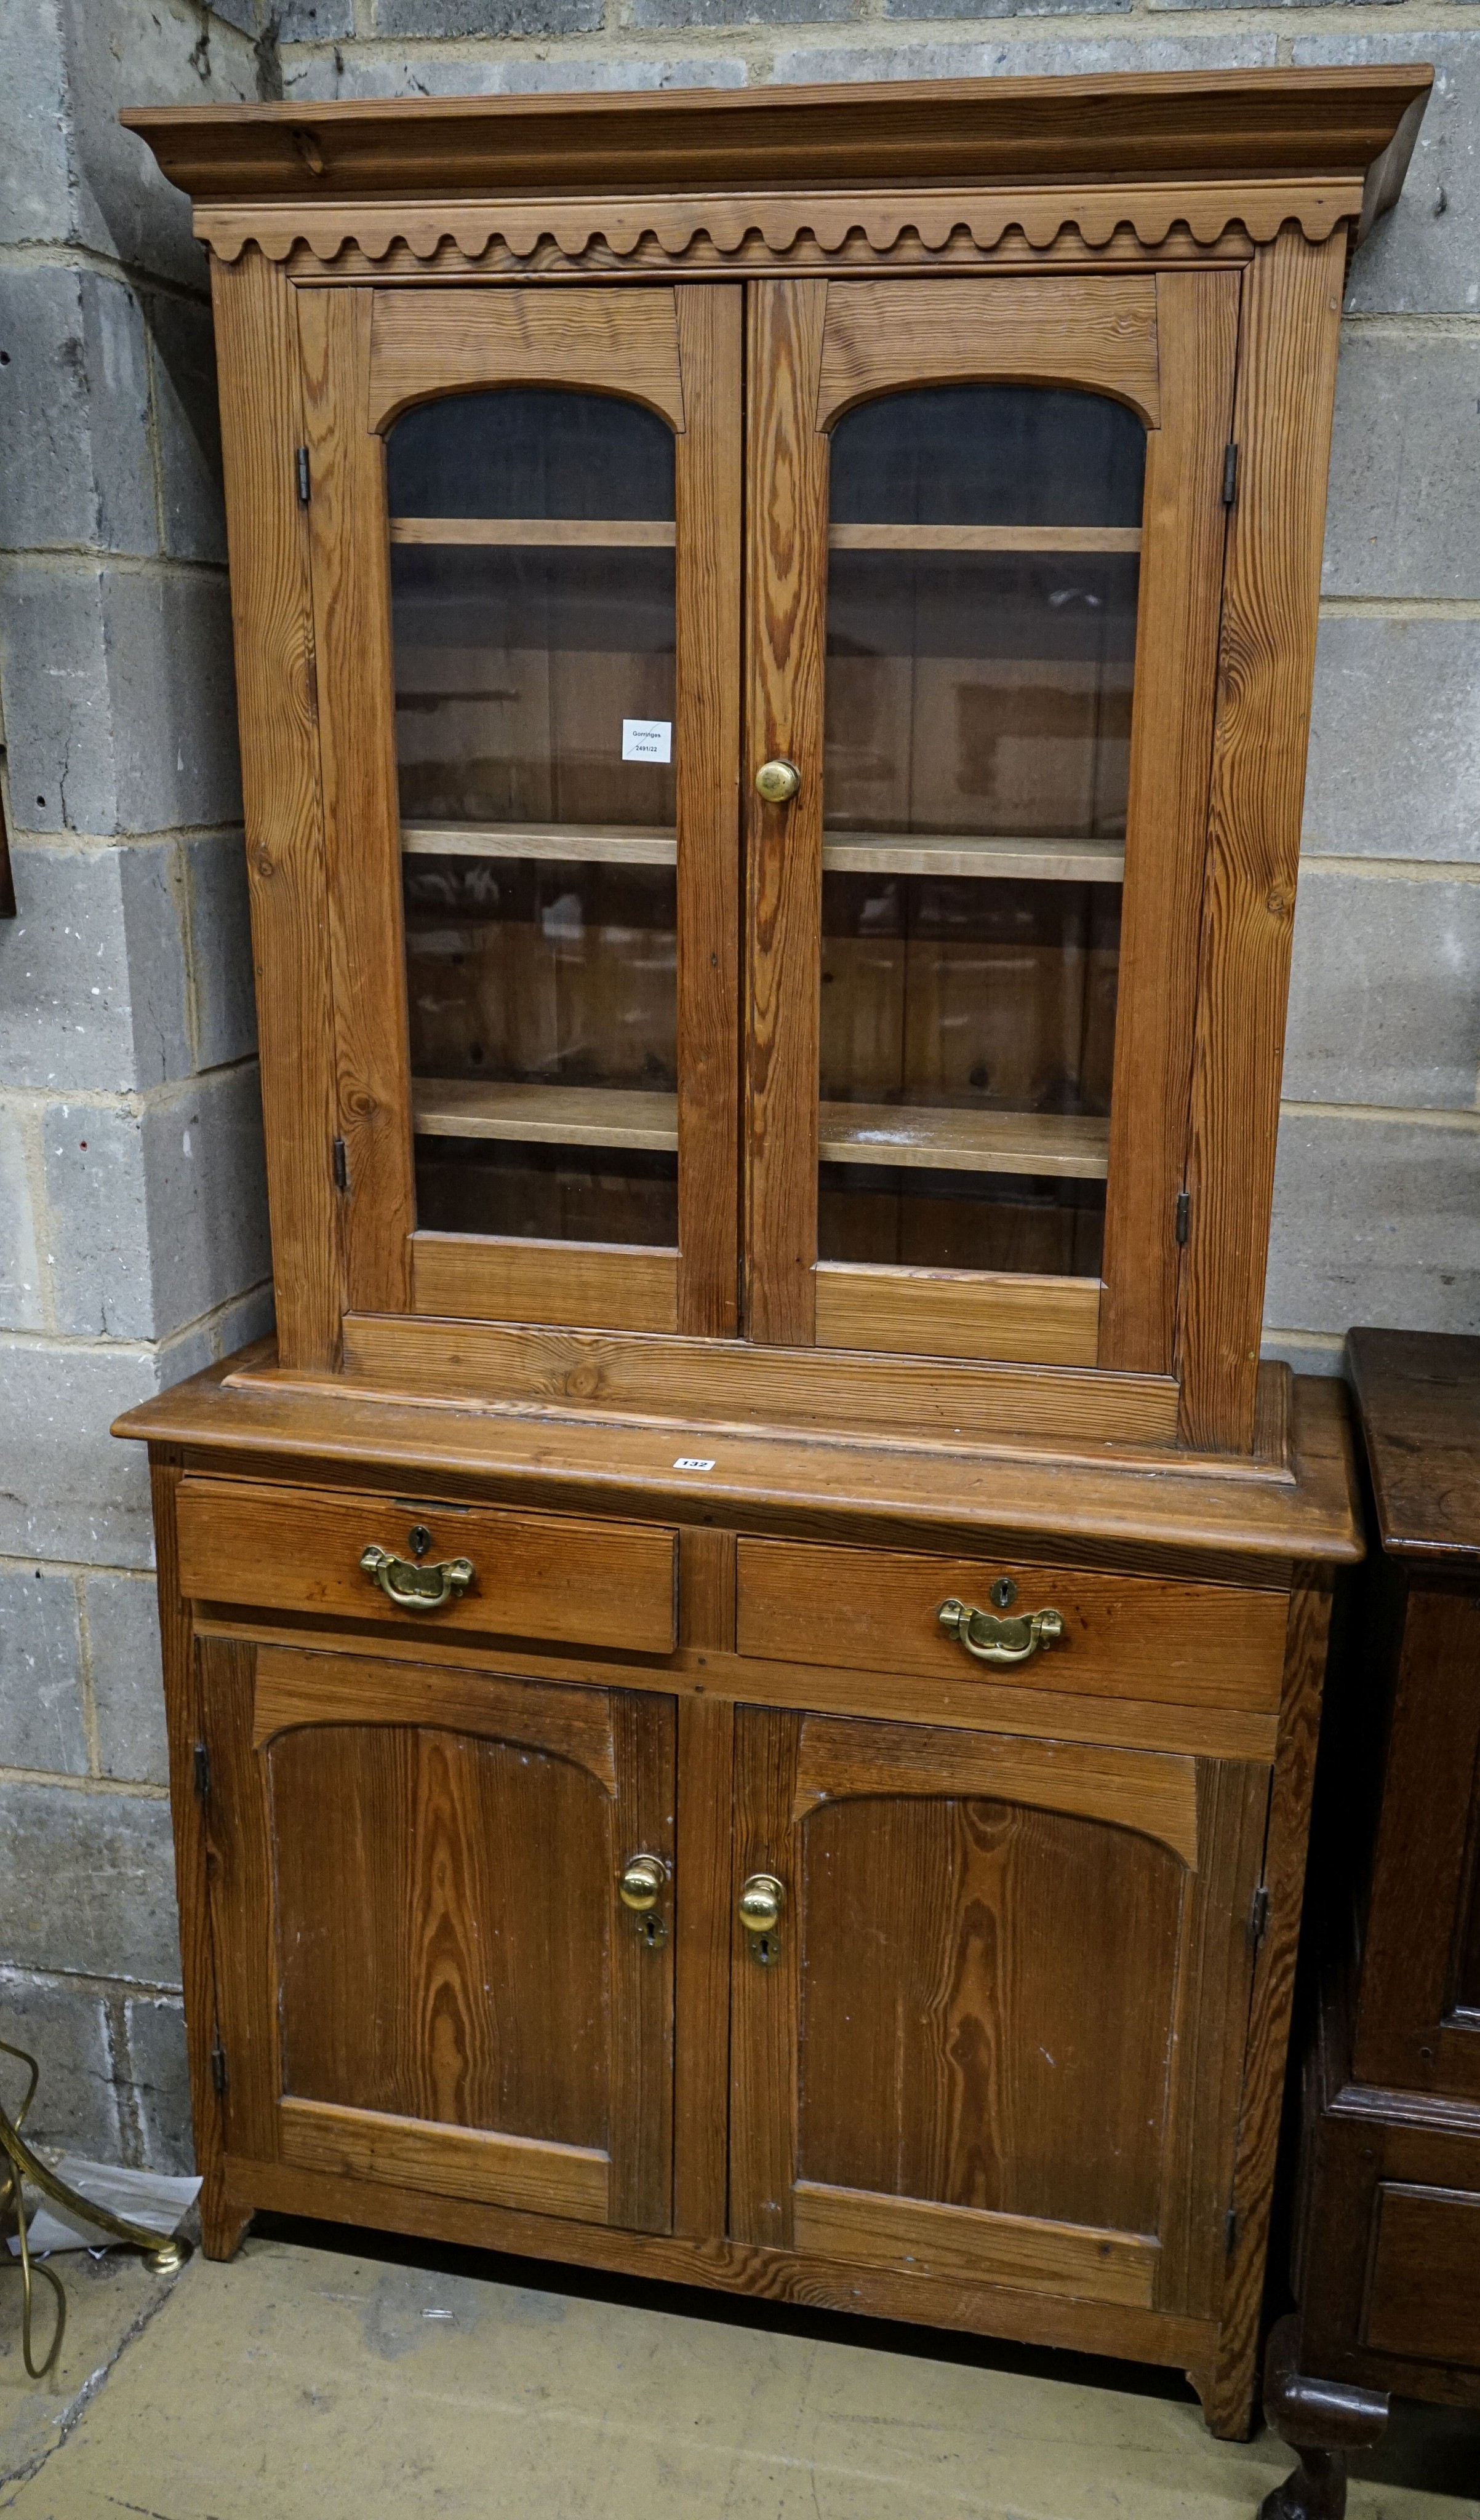 An Edwardian pine dresser, with two glazed doors over two drawers and panelled doors, width 107cm, depth 43cm, height 194cm